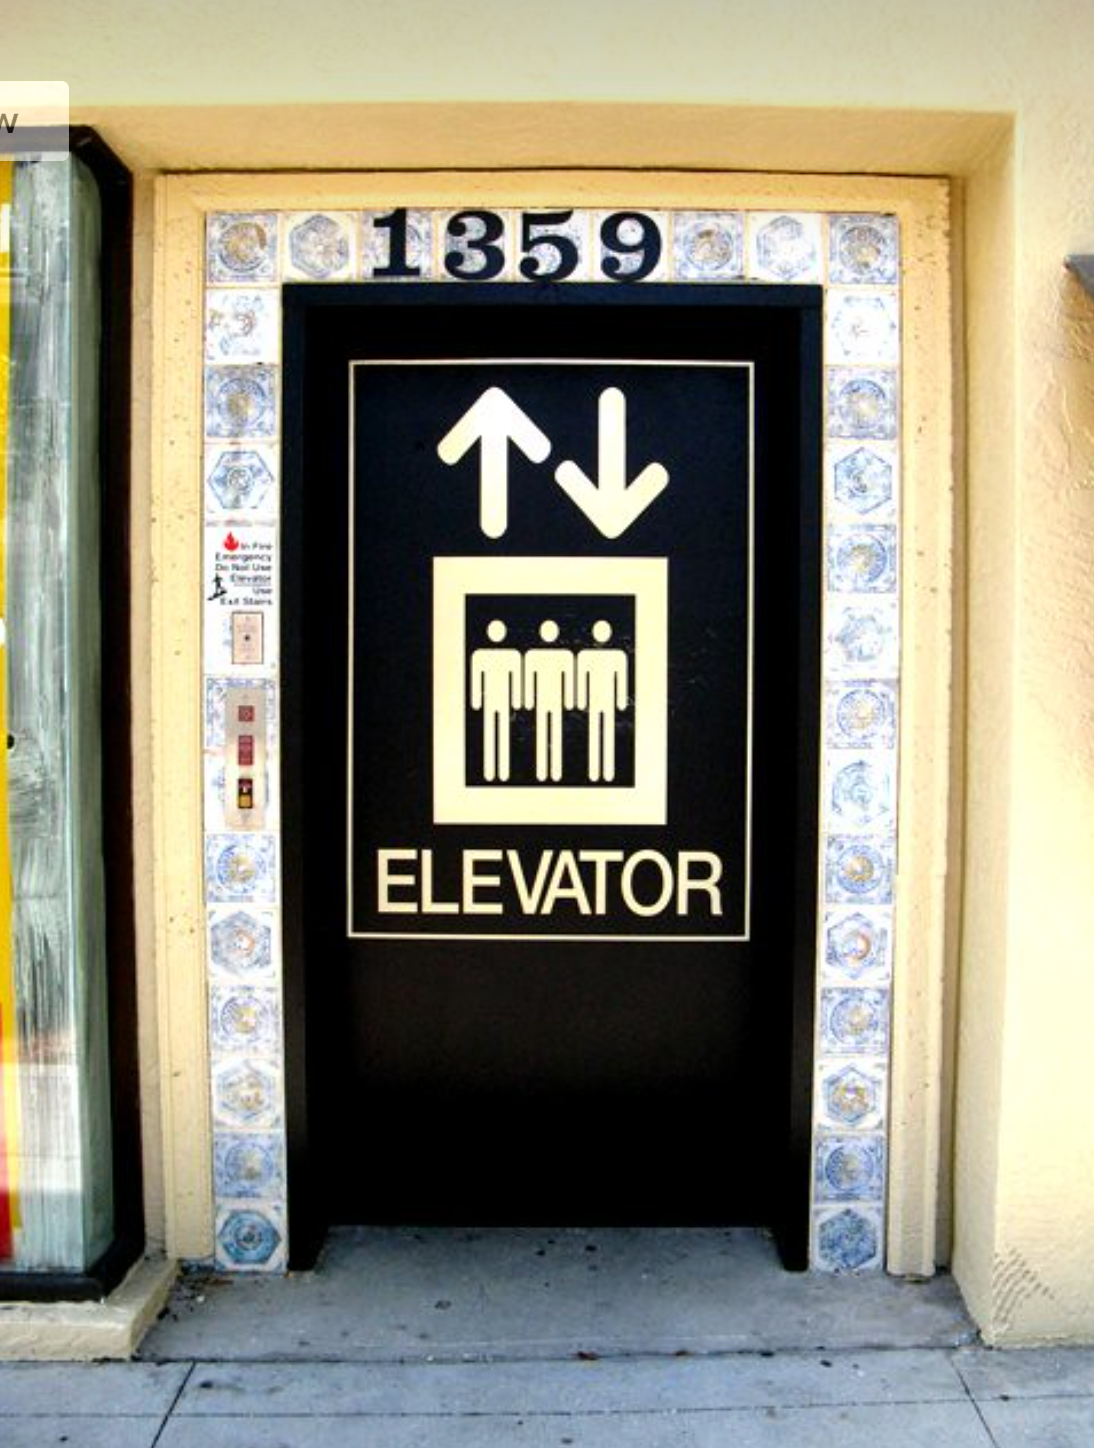 Elevator sign with two arrows pointing up and down 